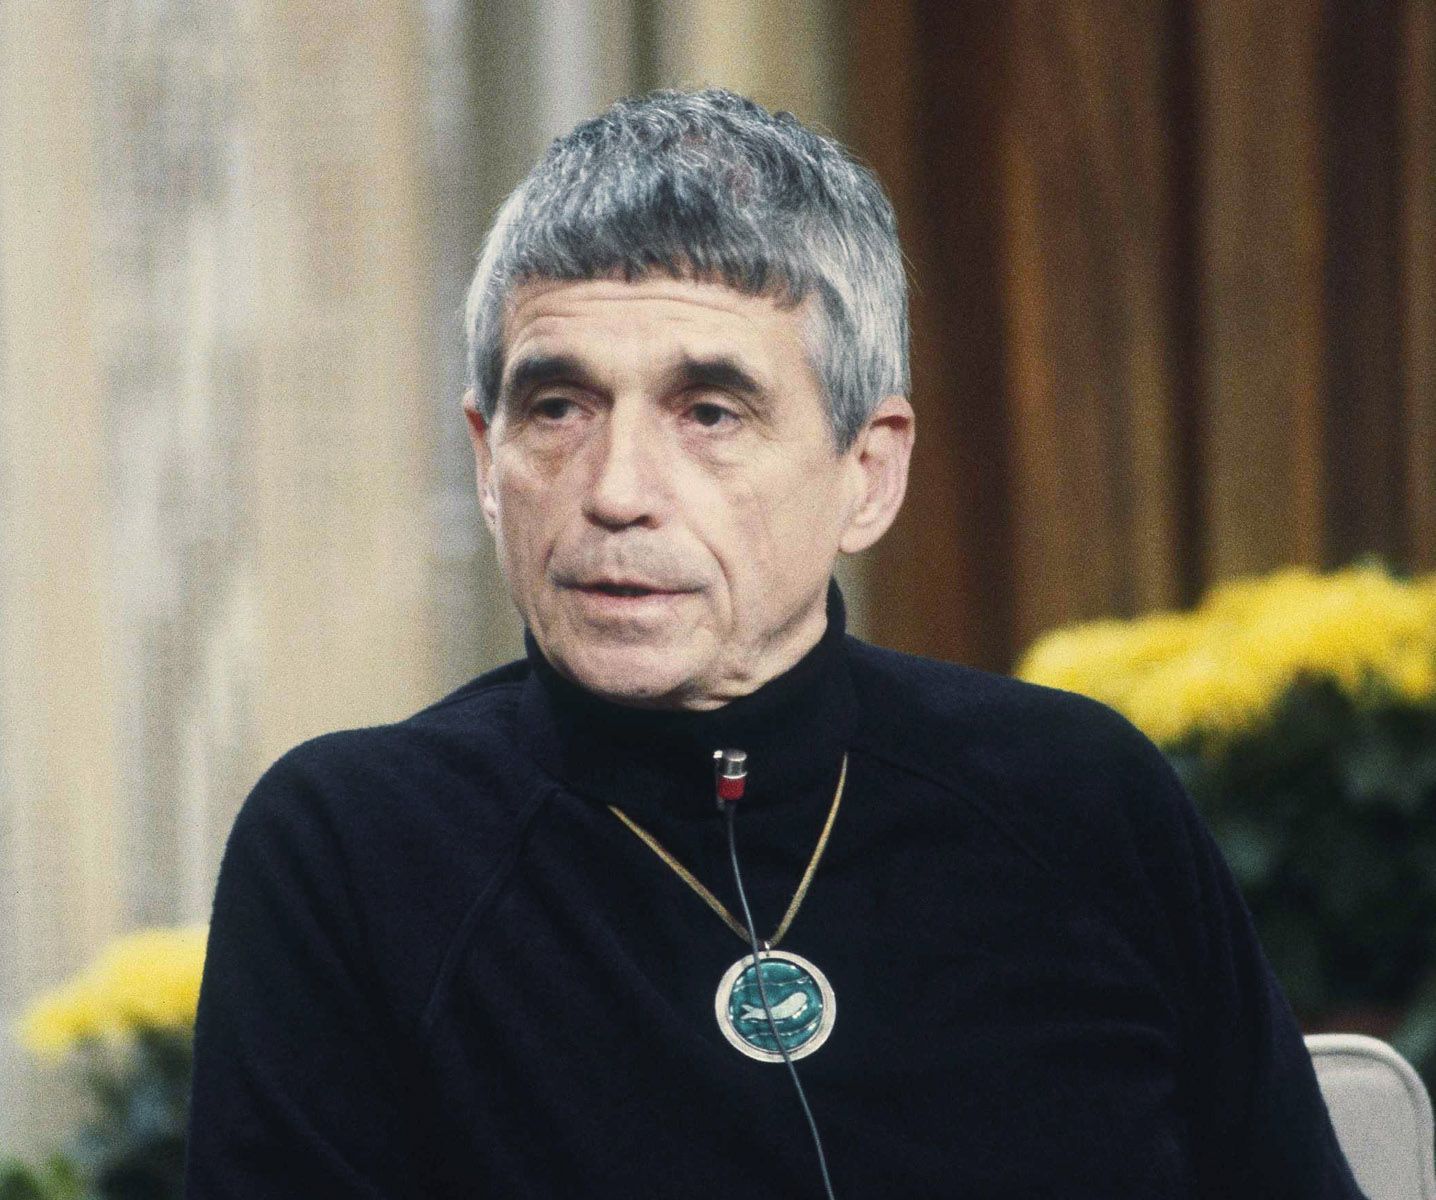 Political activist Daniel Berrigan appears on NBC’s “Today” show in New York in 1981.